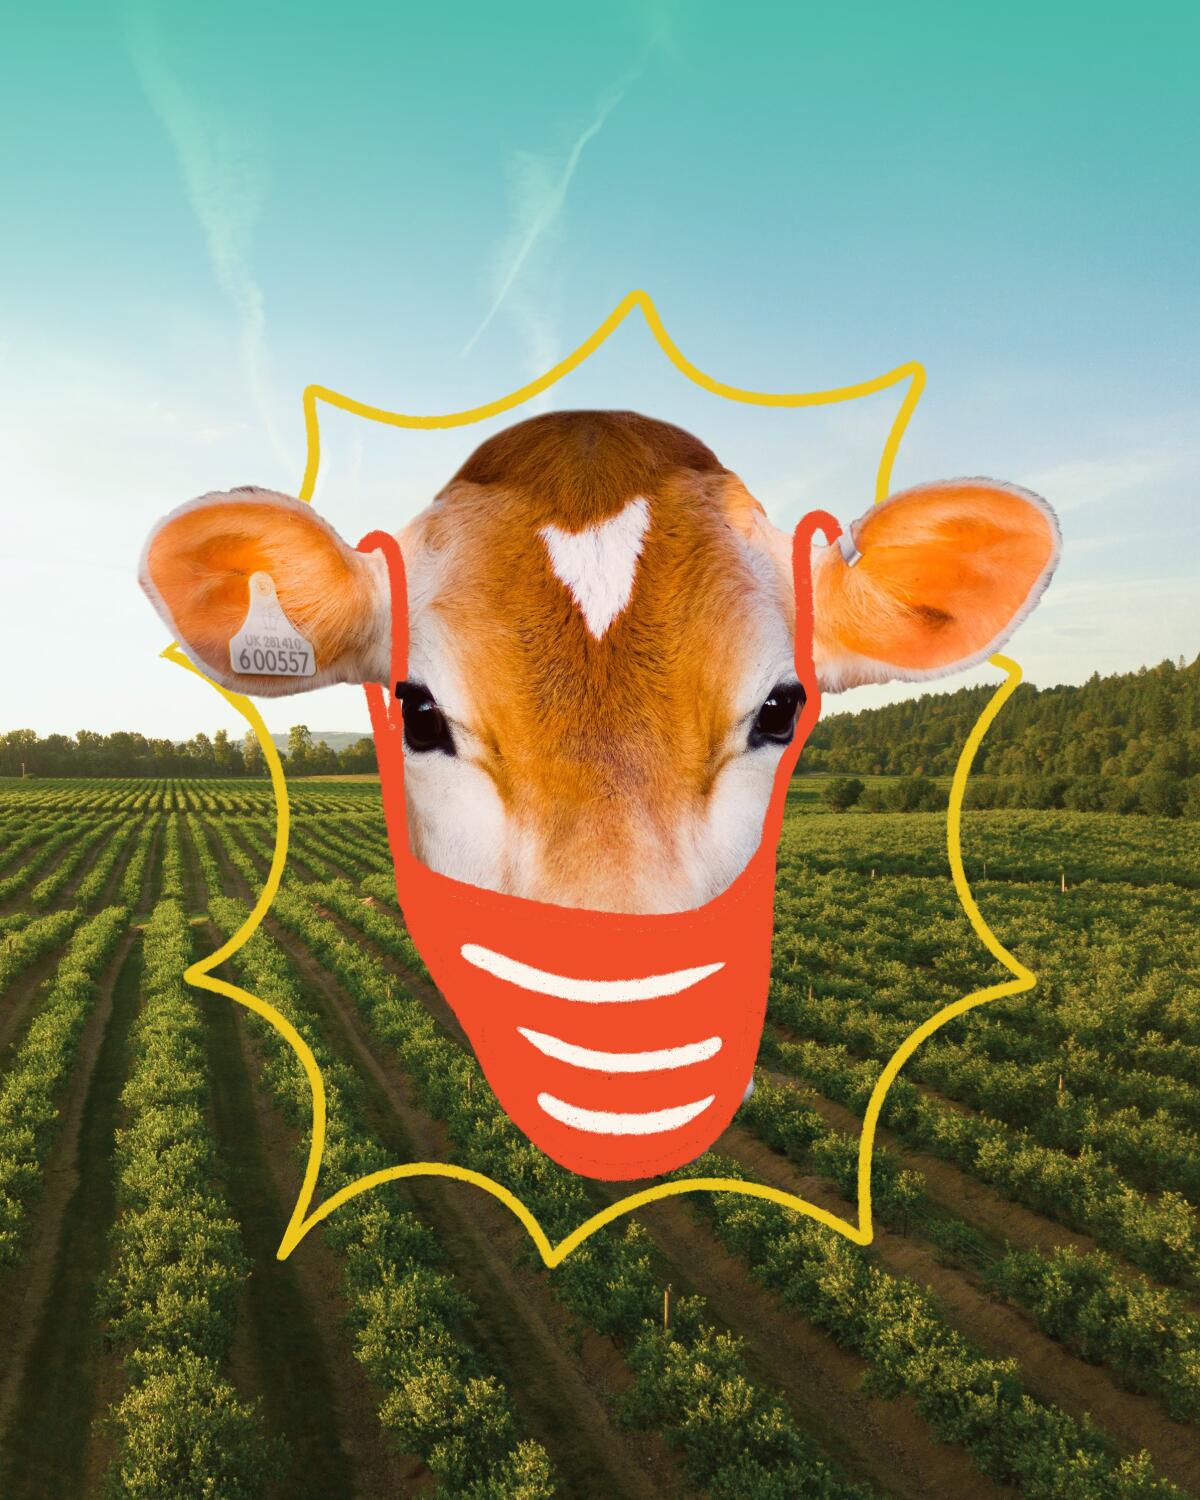 An illustration of a cow wearing a facial mask on an organic farm.